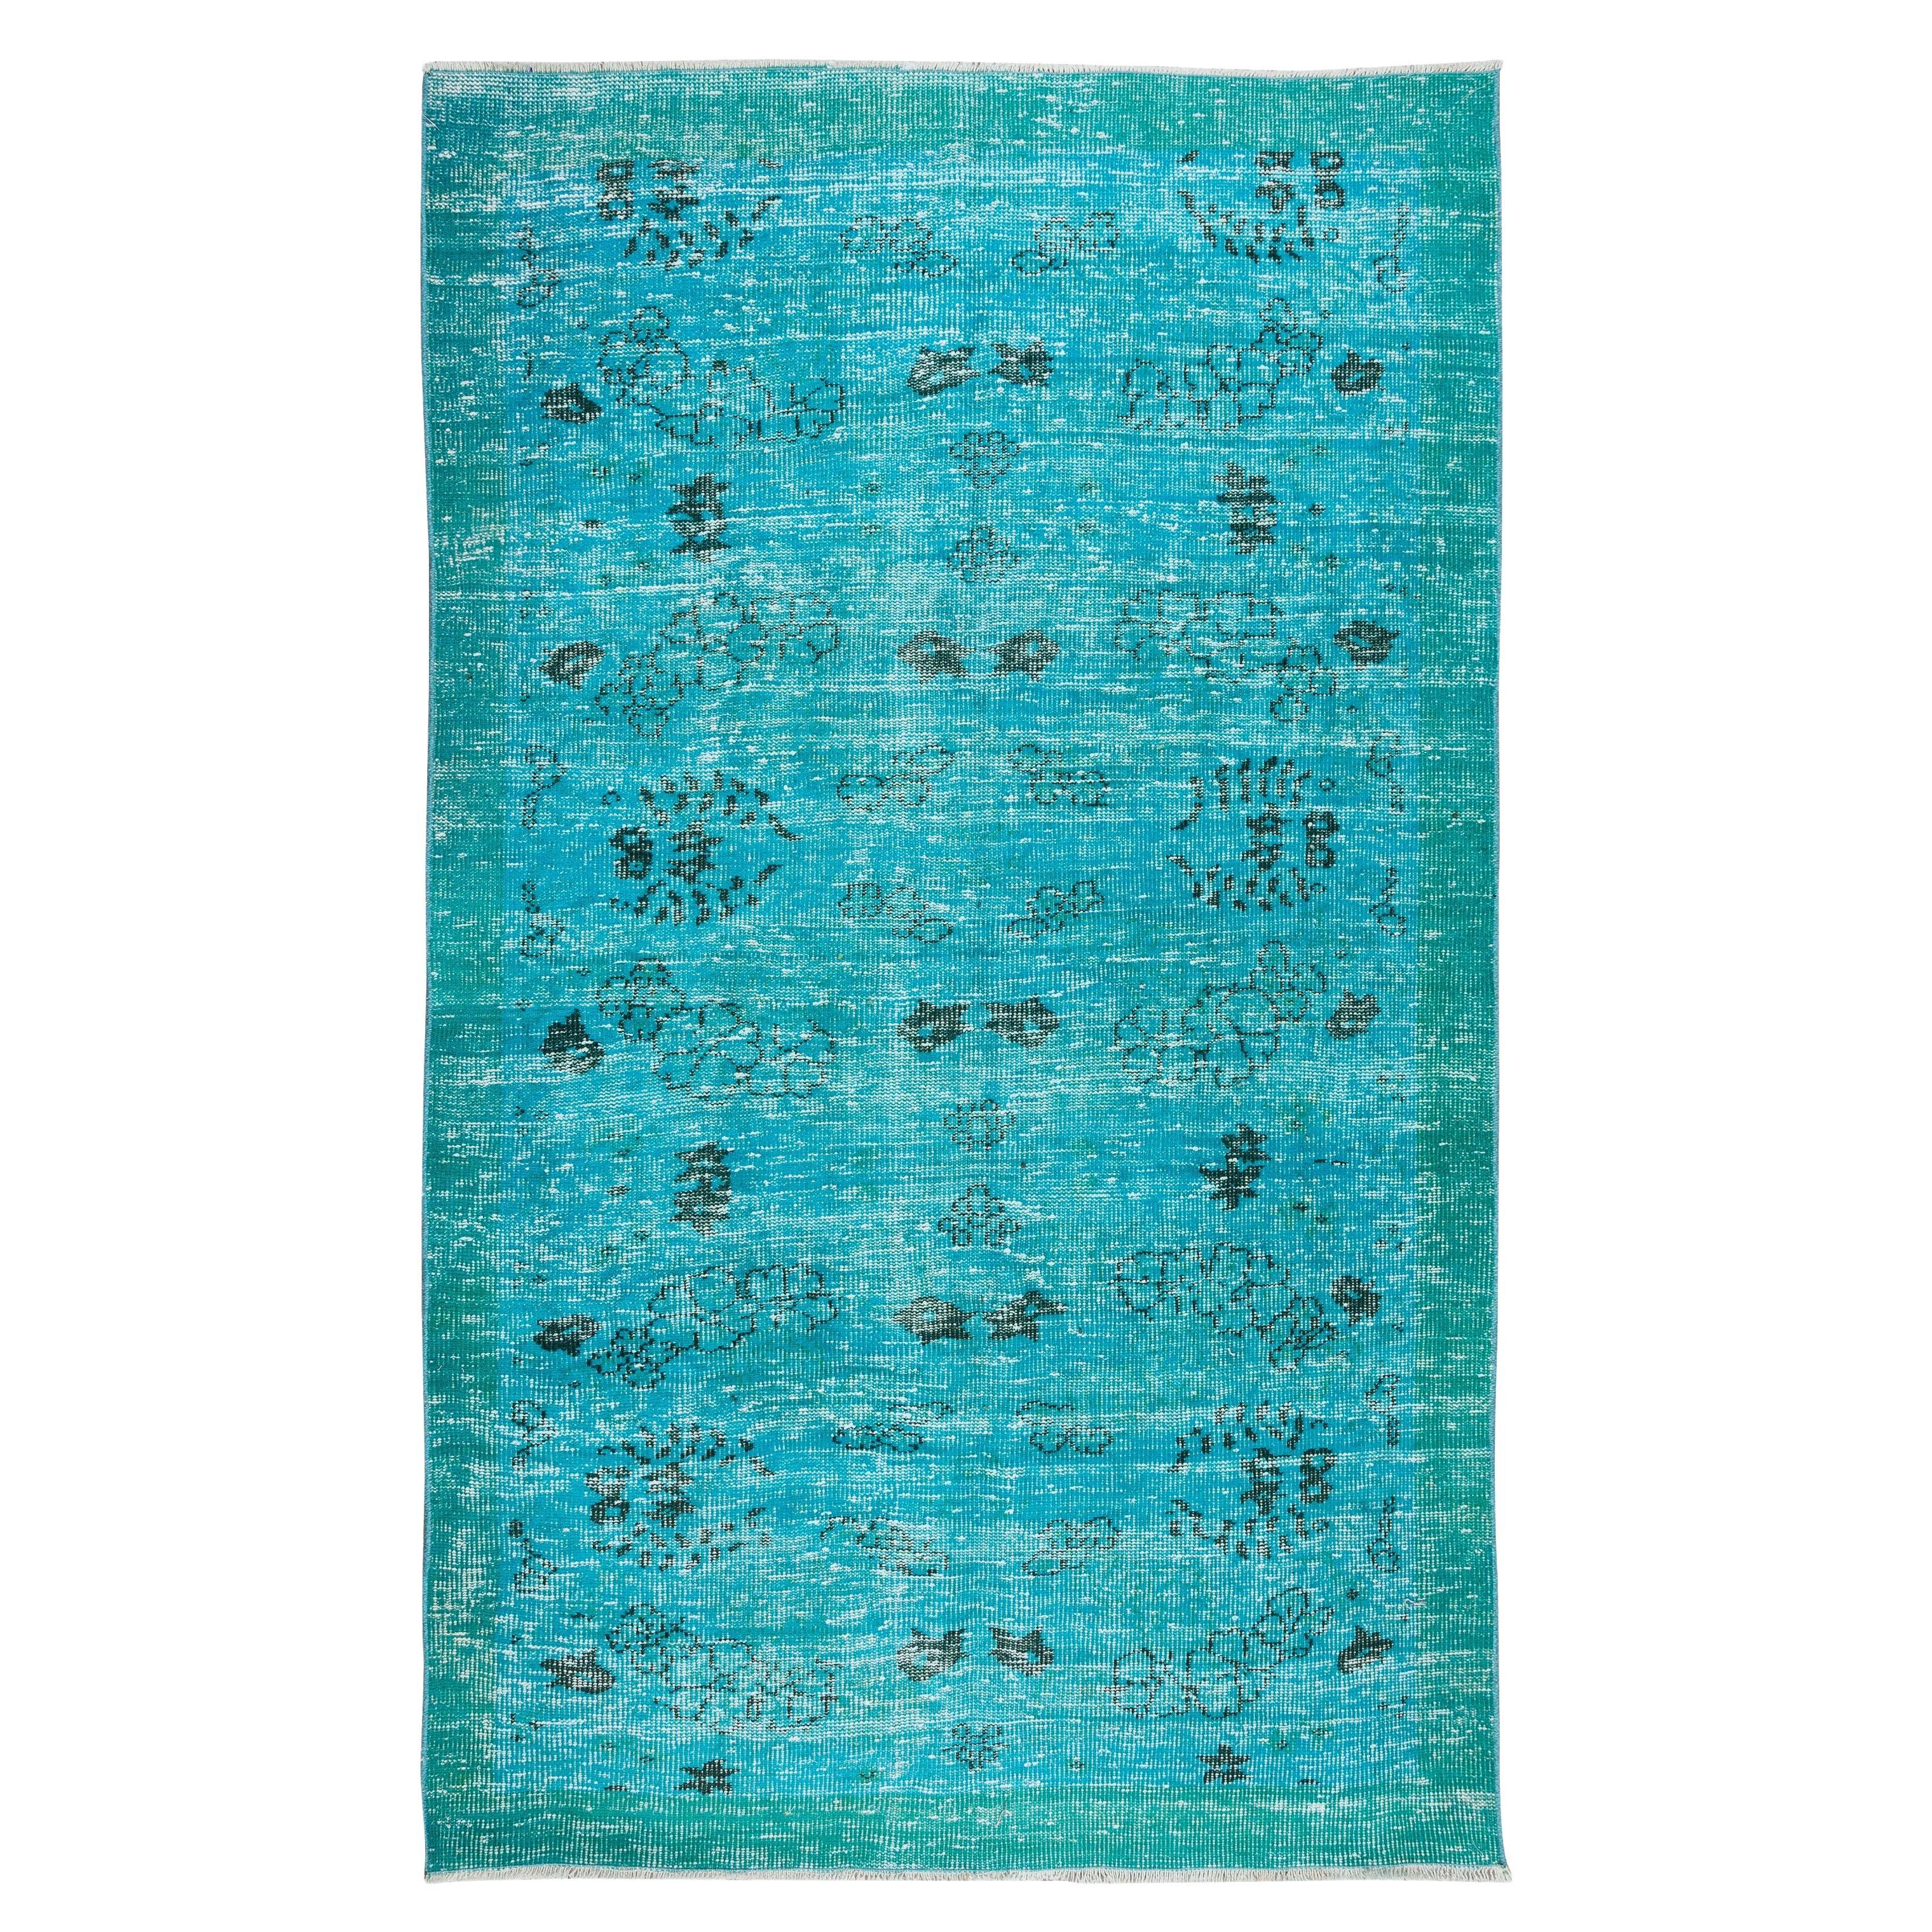 5.2x8.6 Ft Modern Handmade Rug. Vintage Anatolian Carpet Over-Dyed in Teal Blue